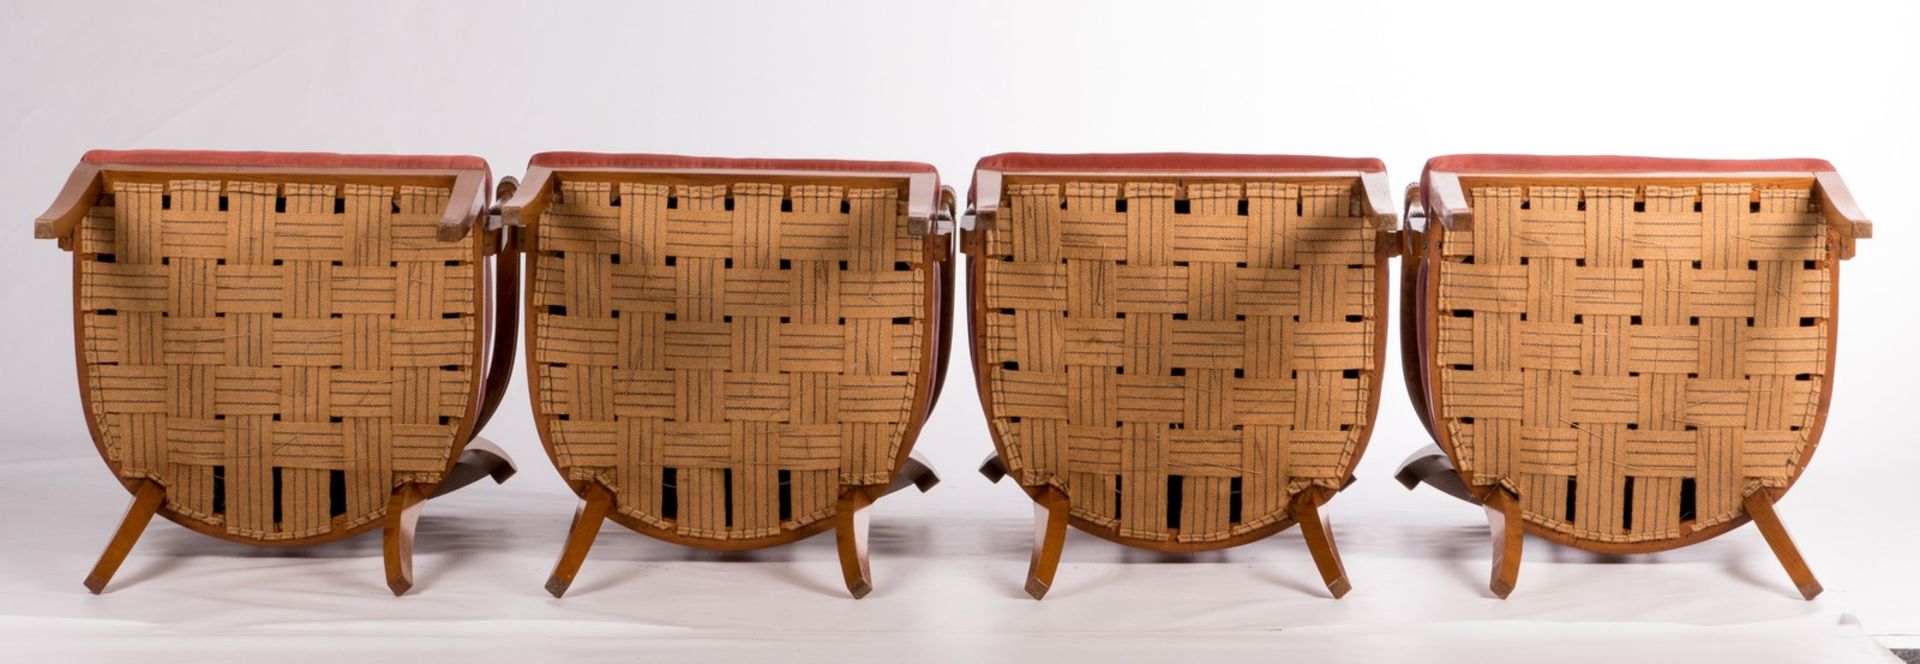 Aa set of four French directoire style cherrywood armchairs, H 88,5 - W 56 - D 59,5 cm - Bild 6 aus 8